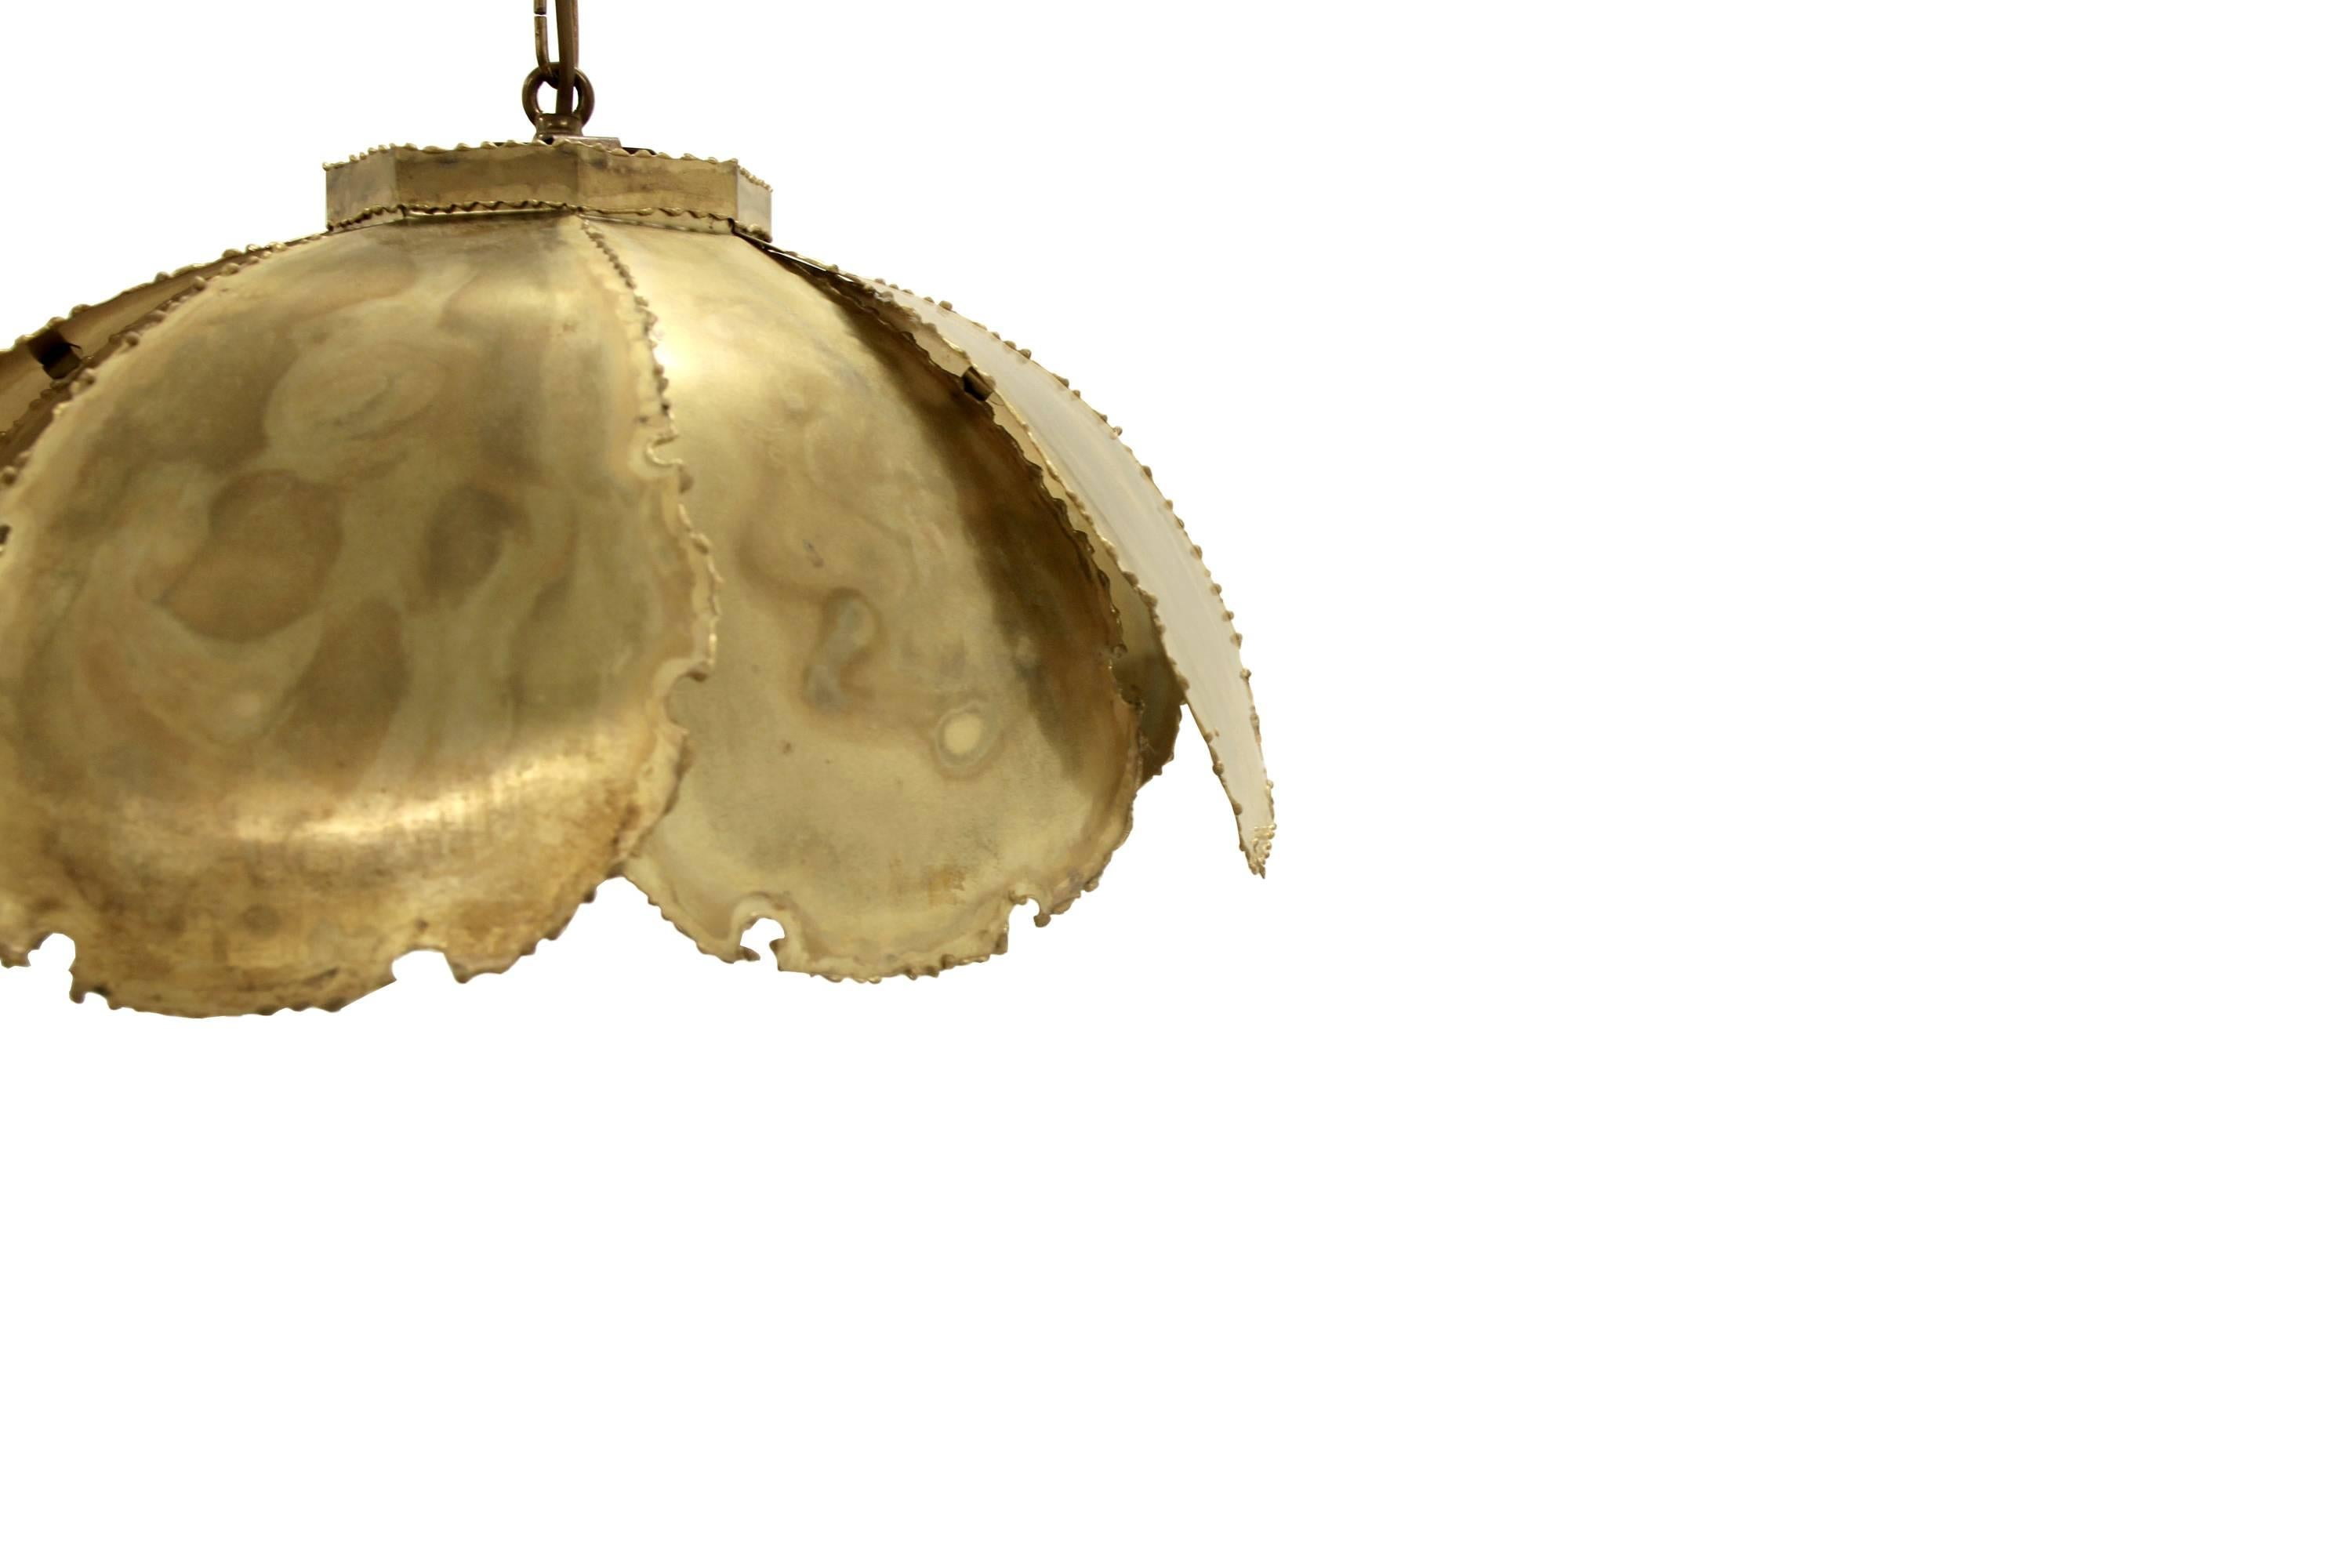 Decorative ceiling lamp in patinated brass.

Designed and made Denmark by Sven Aage Holm Sørensen from 1970s.

The lams is fully working and in excellent vintage condition.

Fixture height: 25cm.